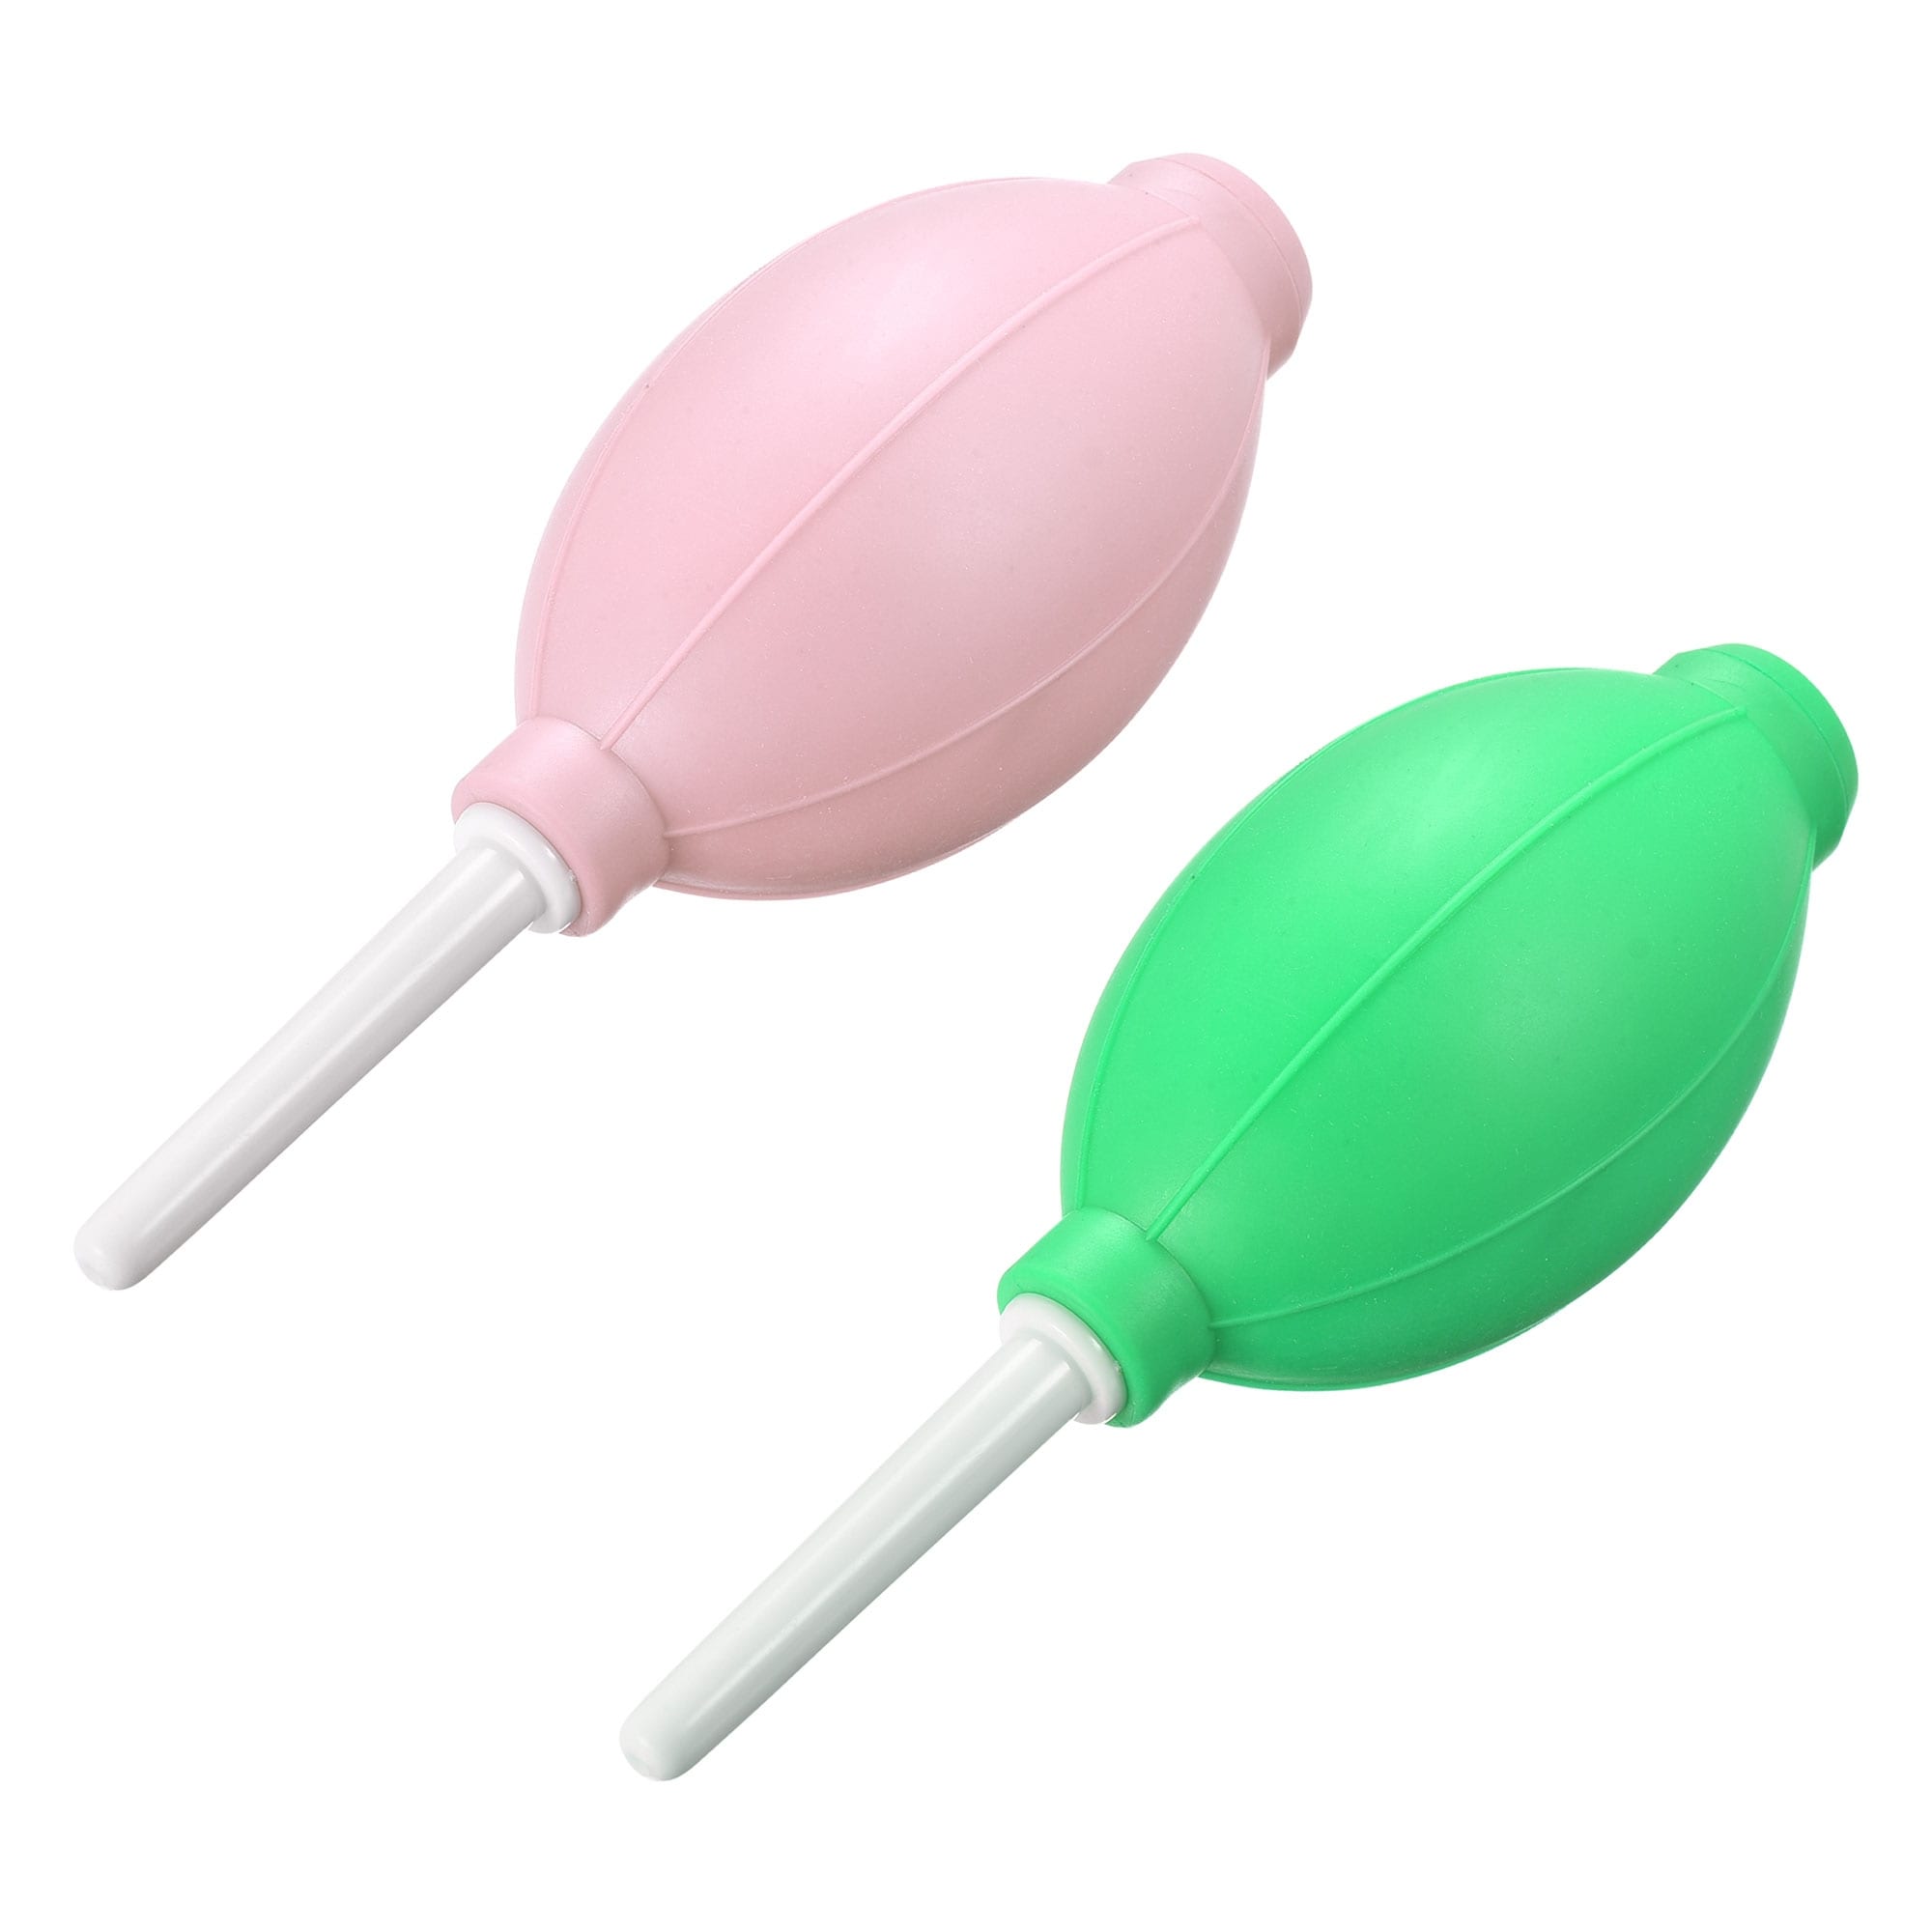 2Pcs Dust Ball Air Blower Rubber Blowing Pump Cleaning Tool 2 Colors Green Pink - Green + Pink